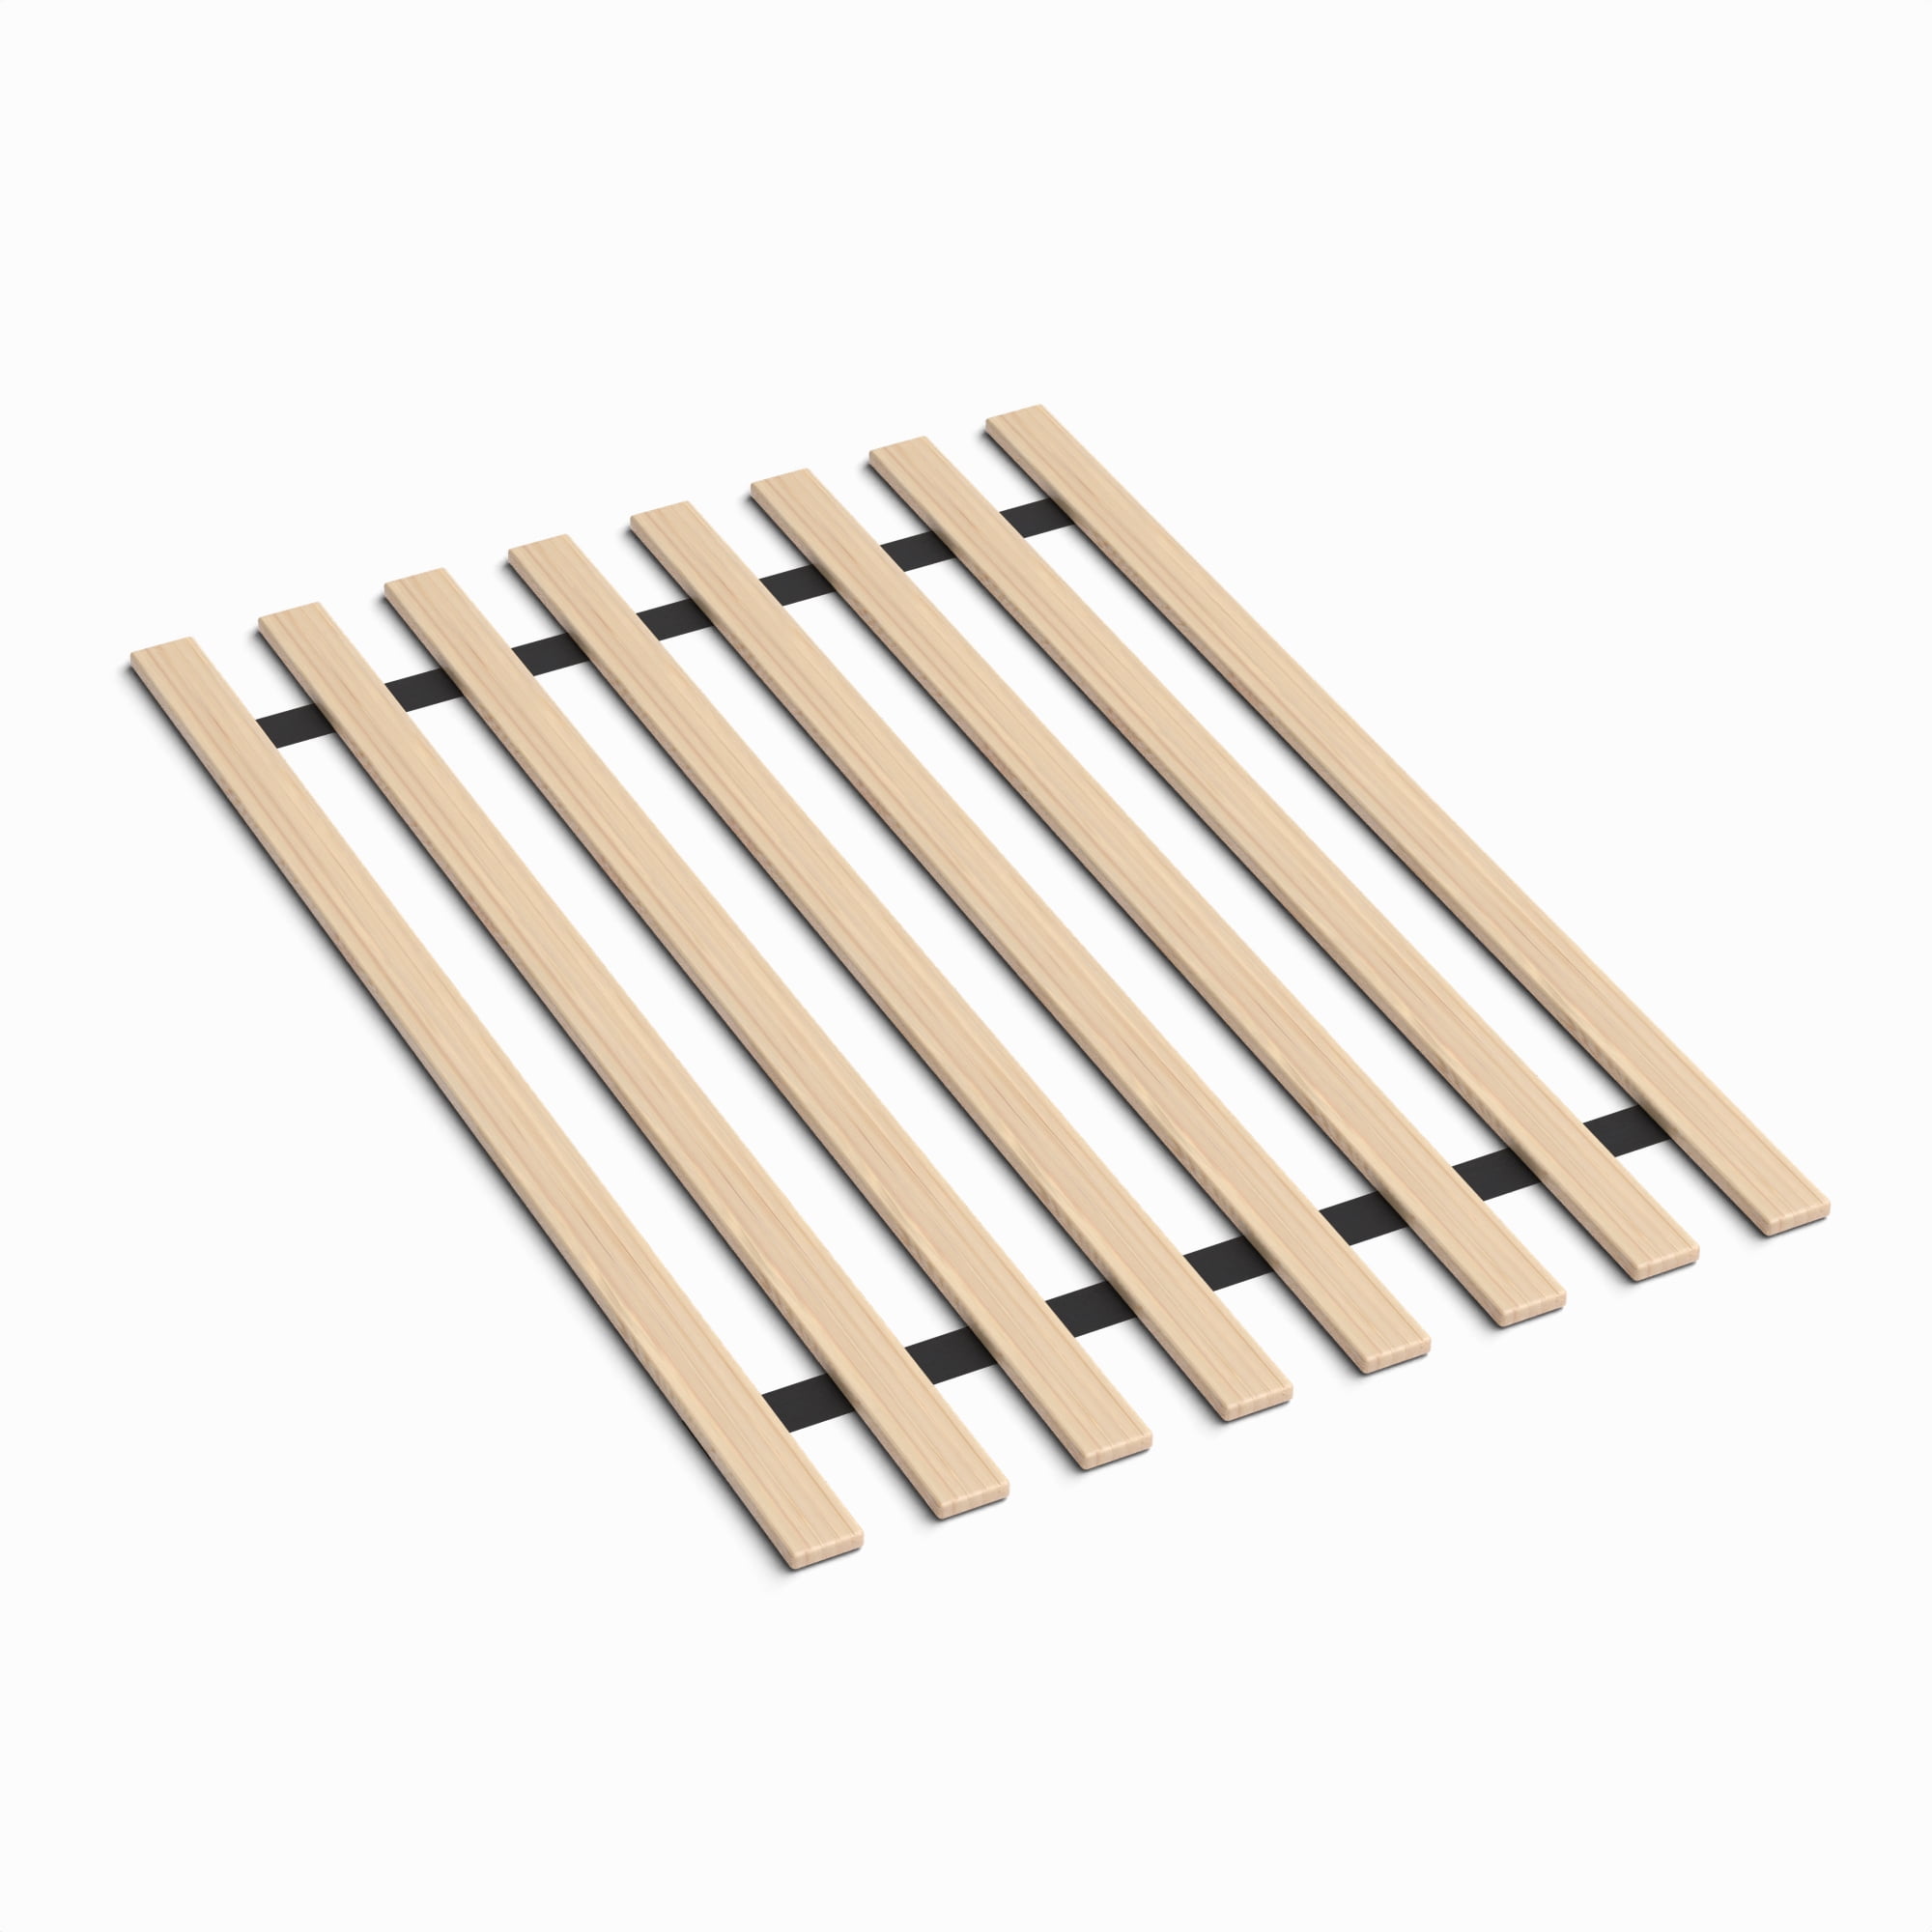 Single Bed Slats 38 in Twin Bed Solid Pine Mattress Support Wooden Slats 38  in Long x 2.75 in Wide x 0.65 in Depth Pack of 13 Count Bed Replacement